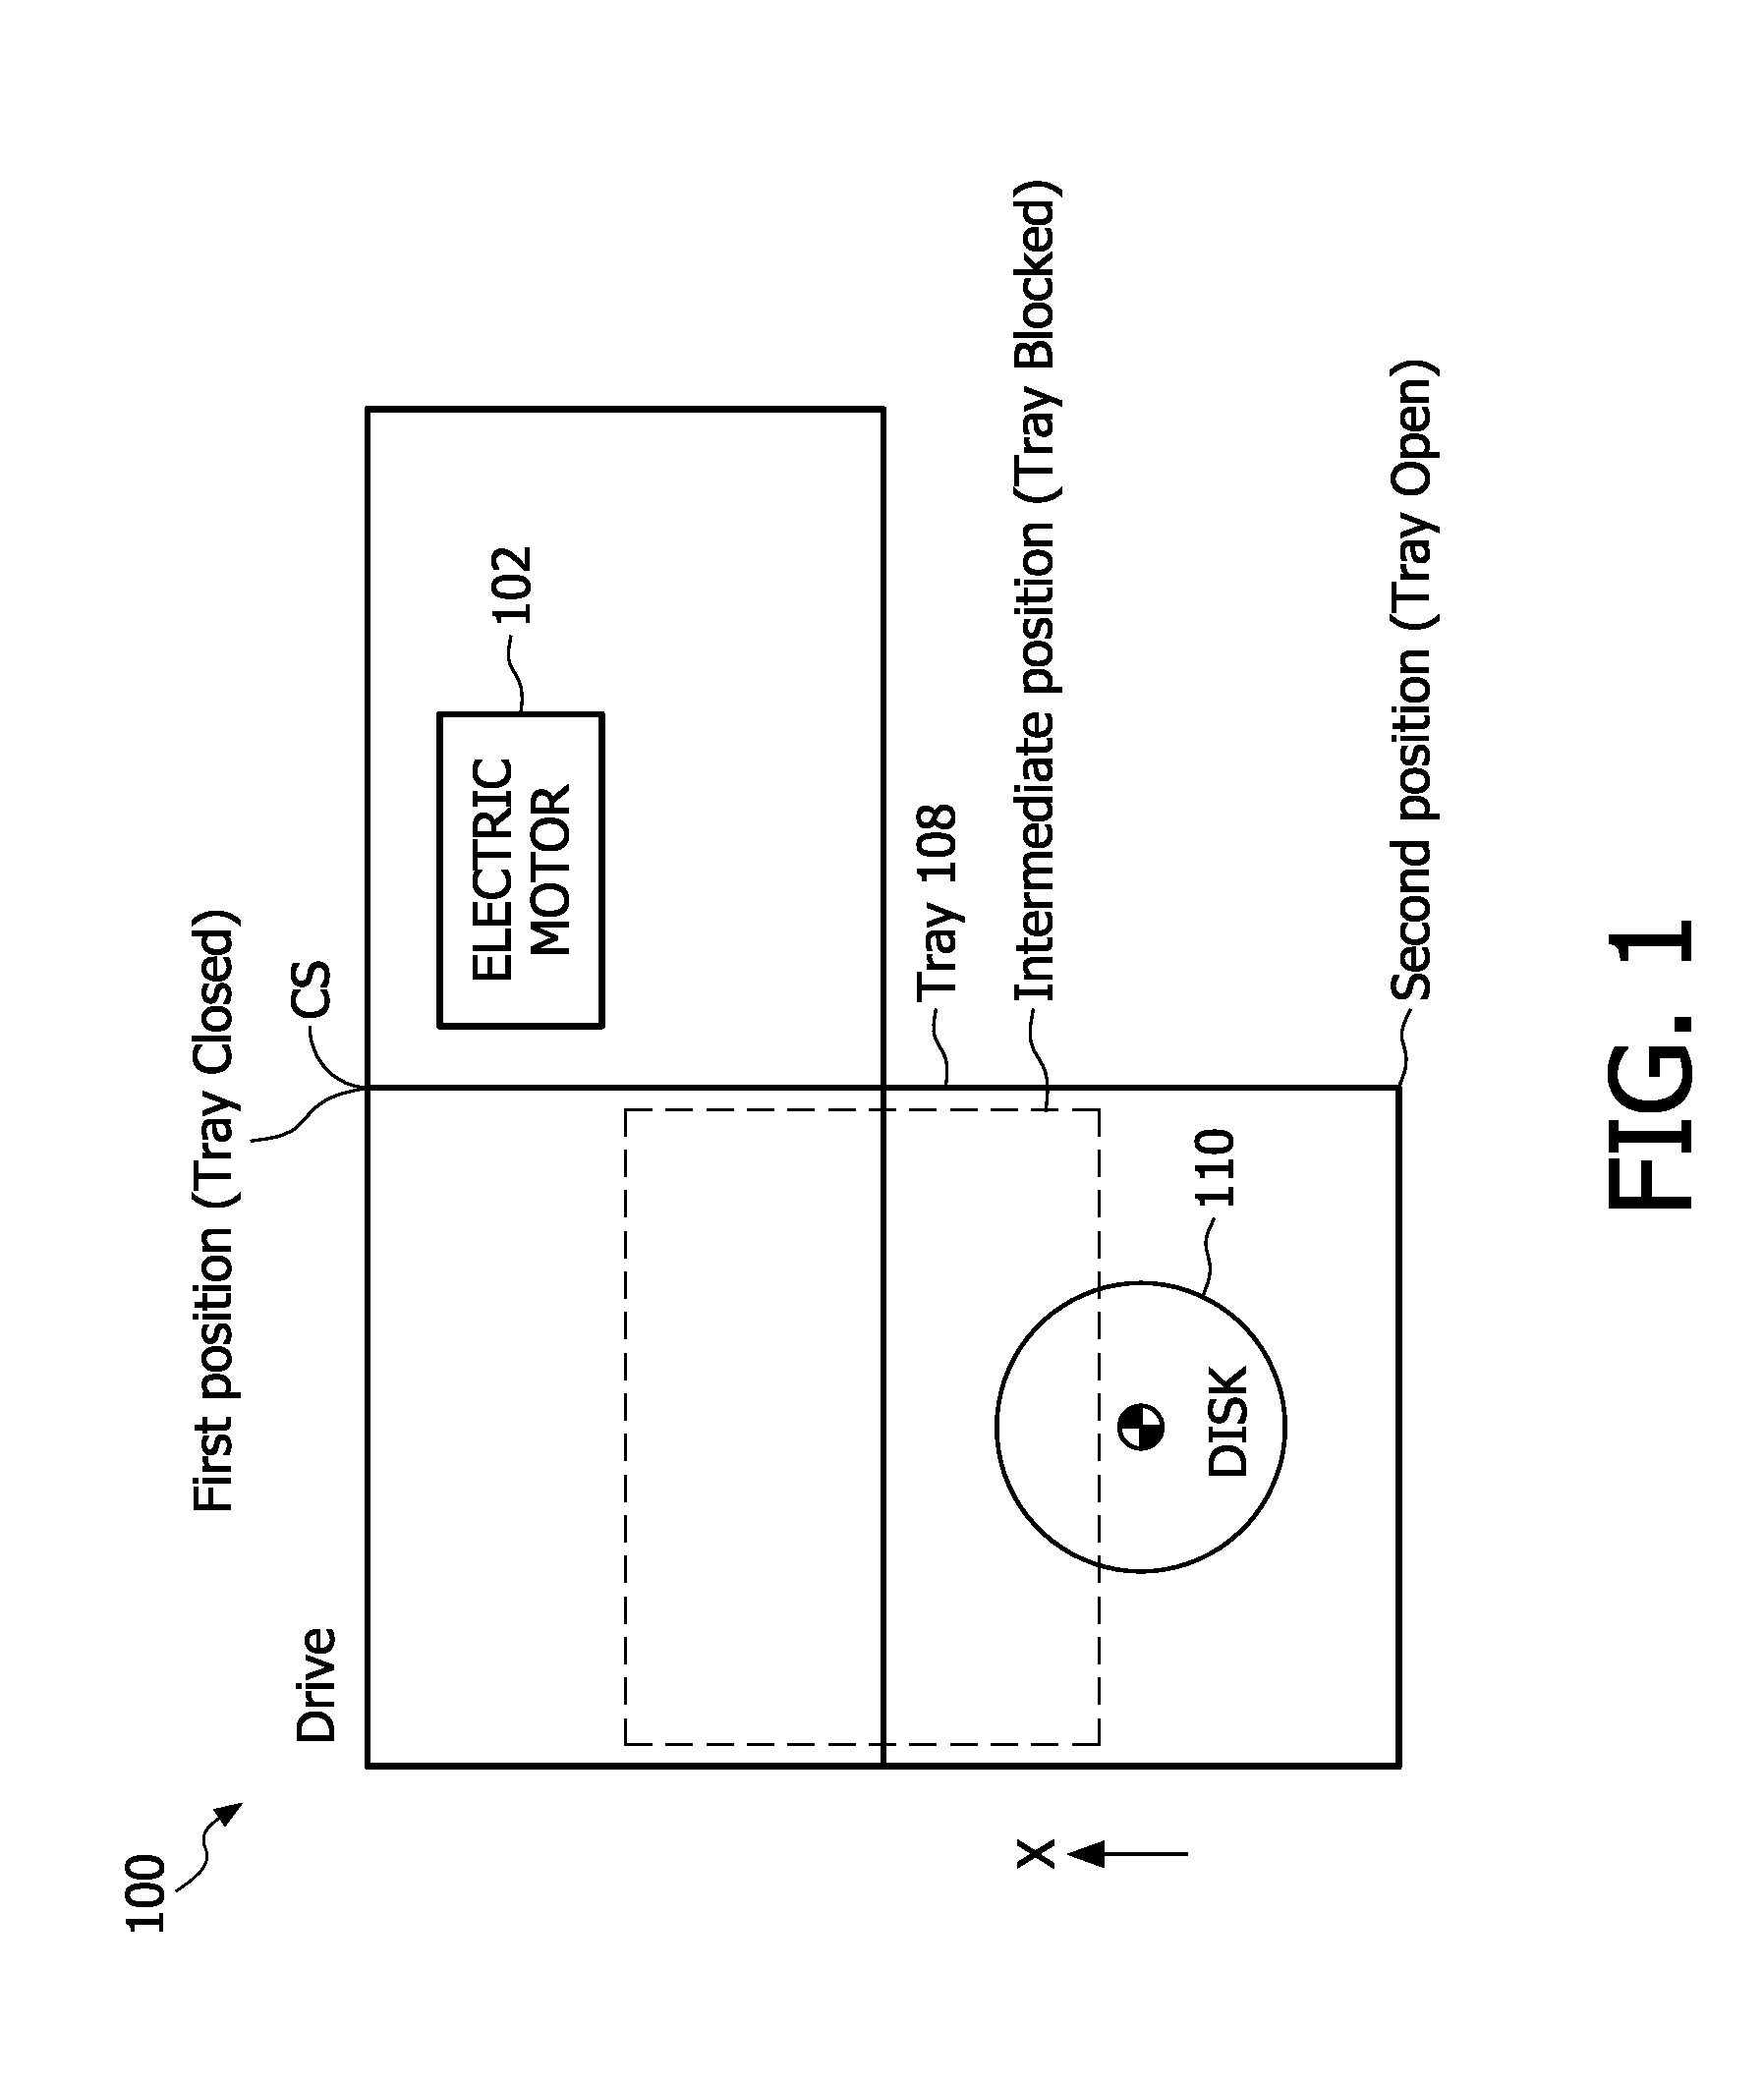 Disk drive and tray control mechanism